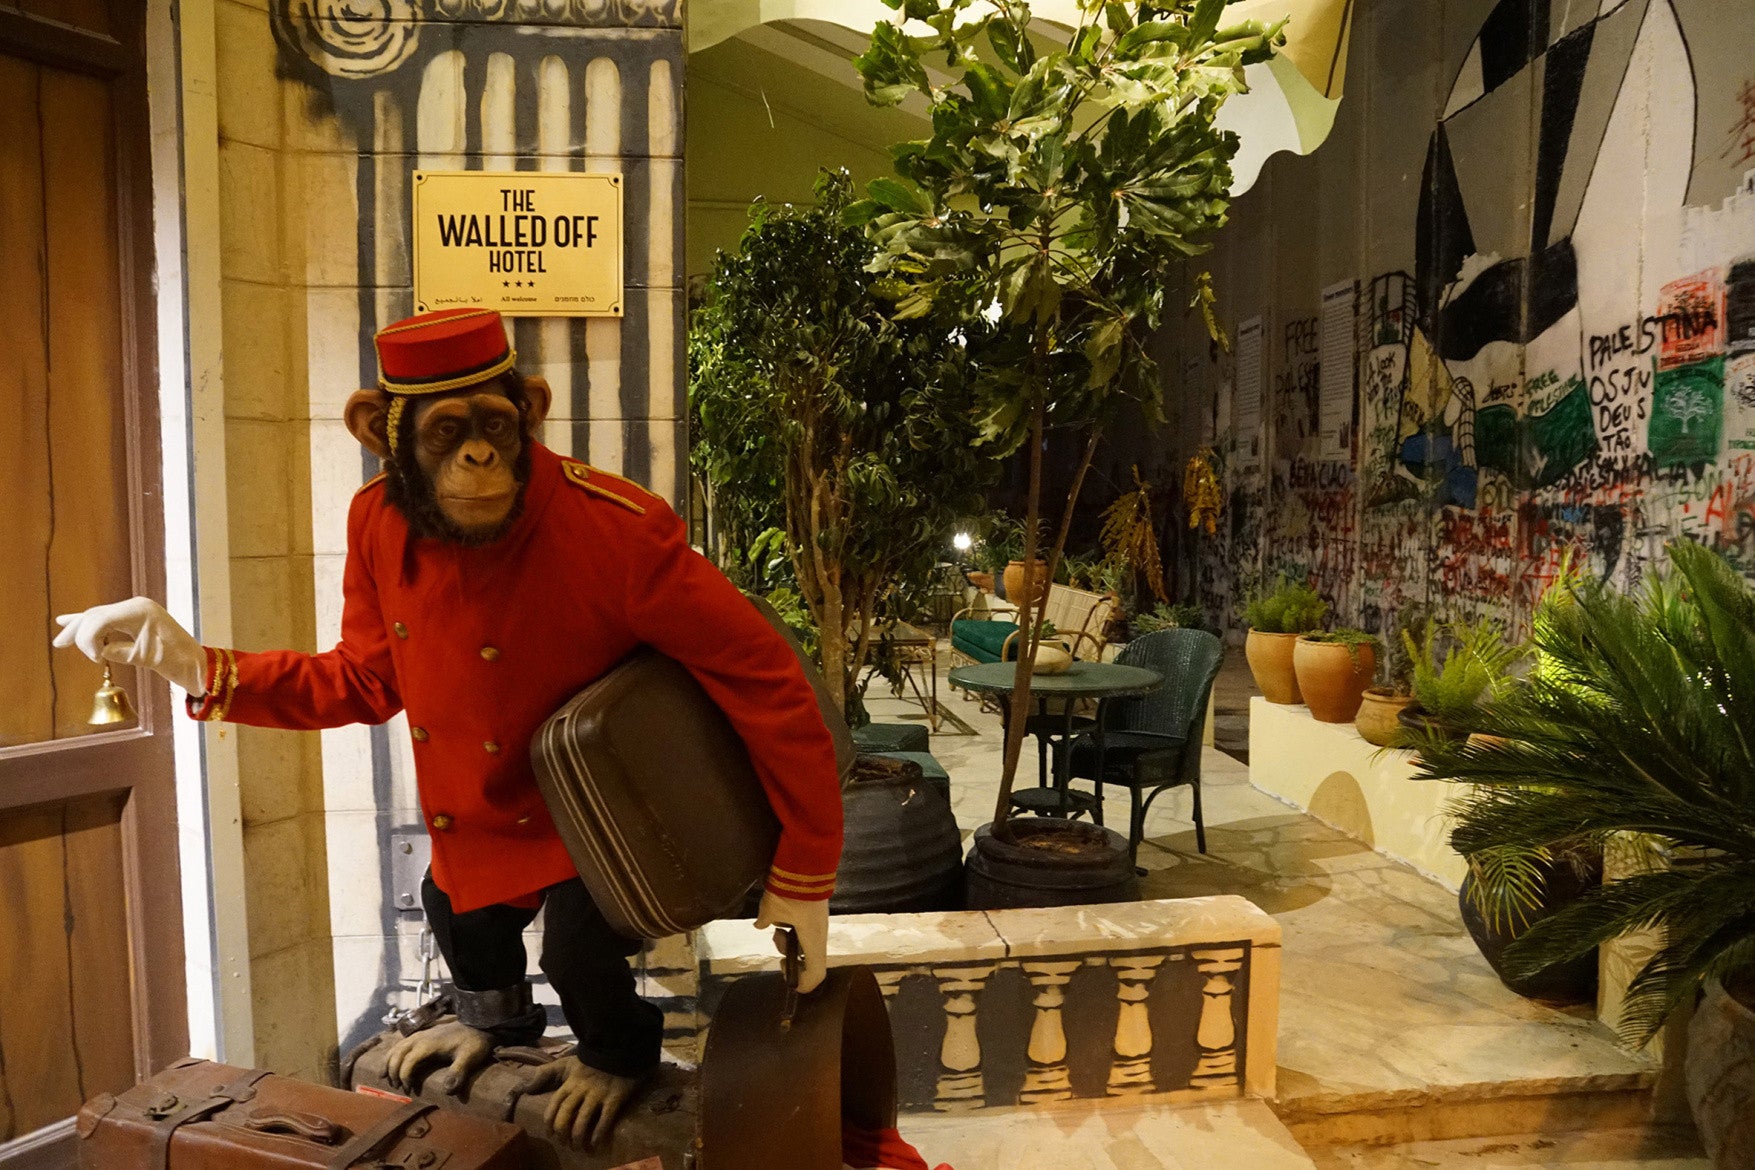 Take a Closer Look Inside the Banksy Hotel